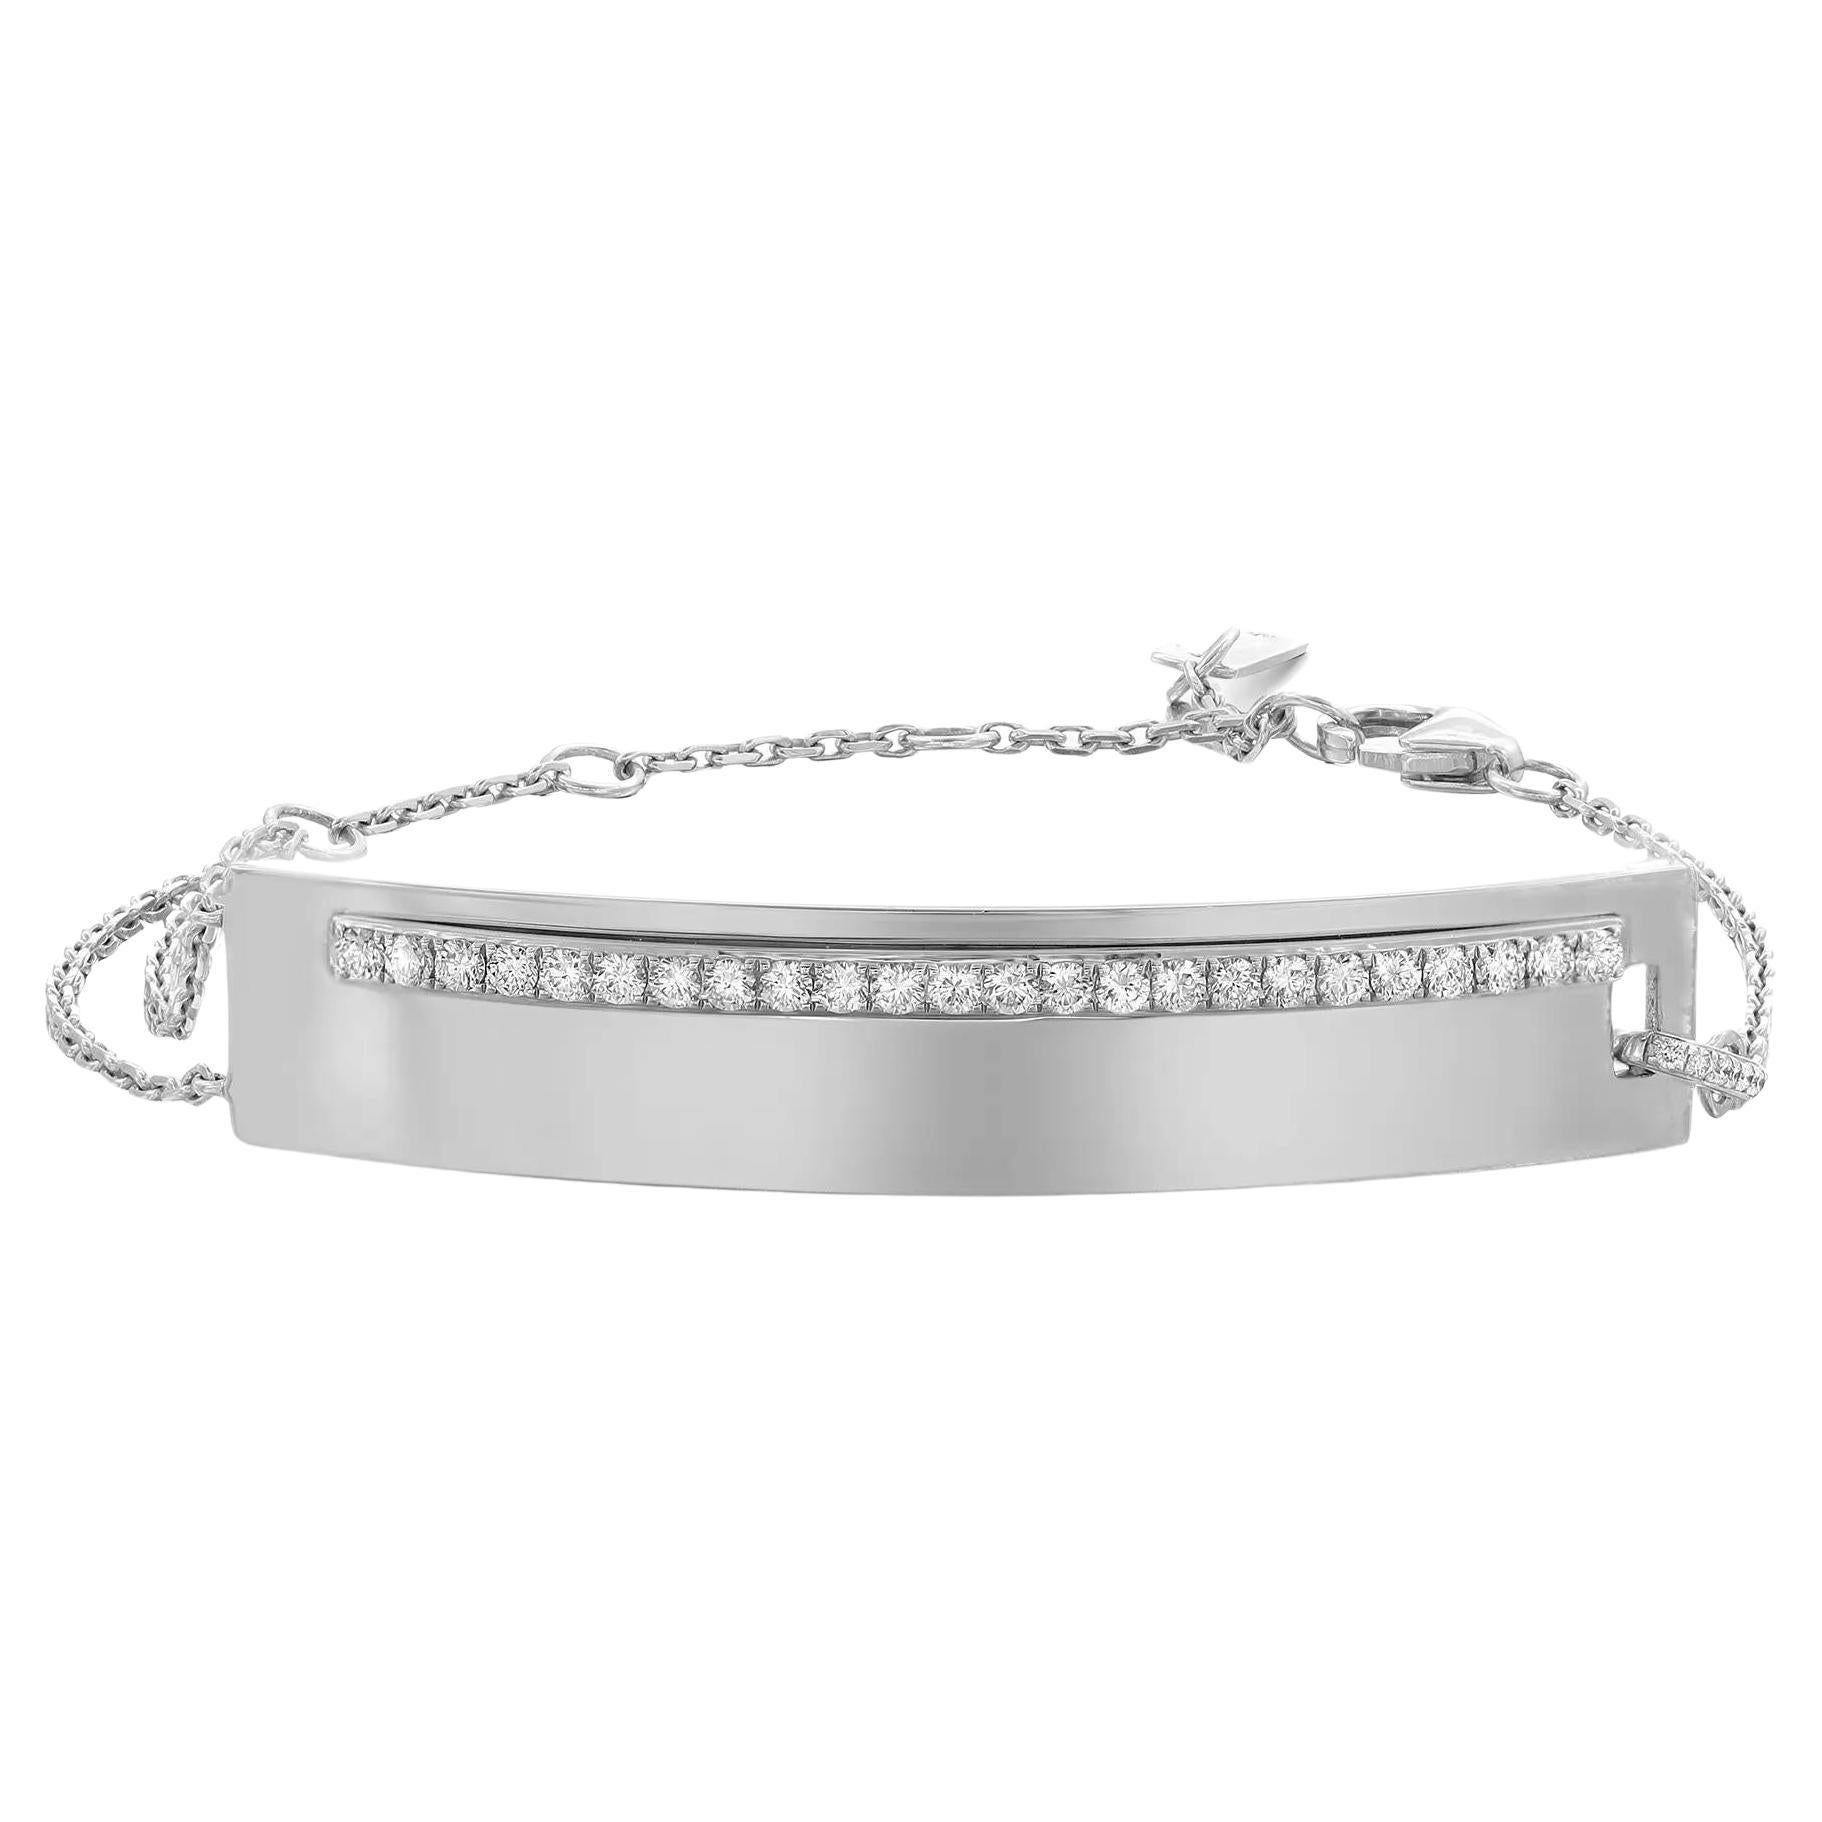 Messika 0.44Cttw Kate Sur Chaine Diamond Bracelet 18K White Gold 7.5 Inches For Sale